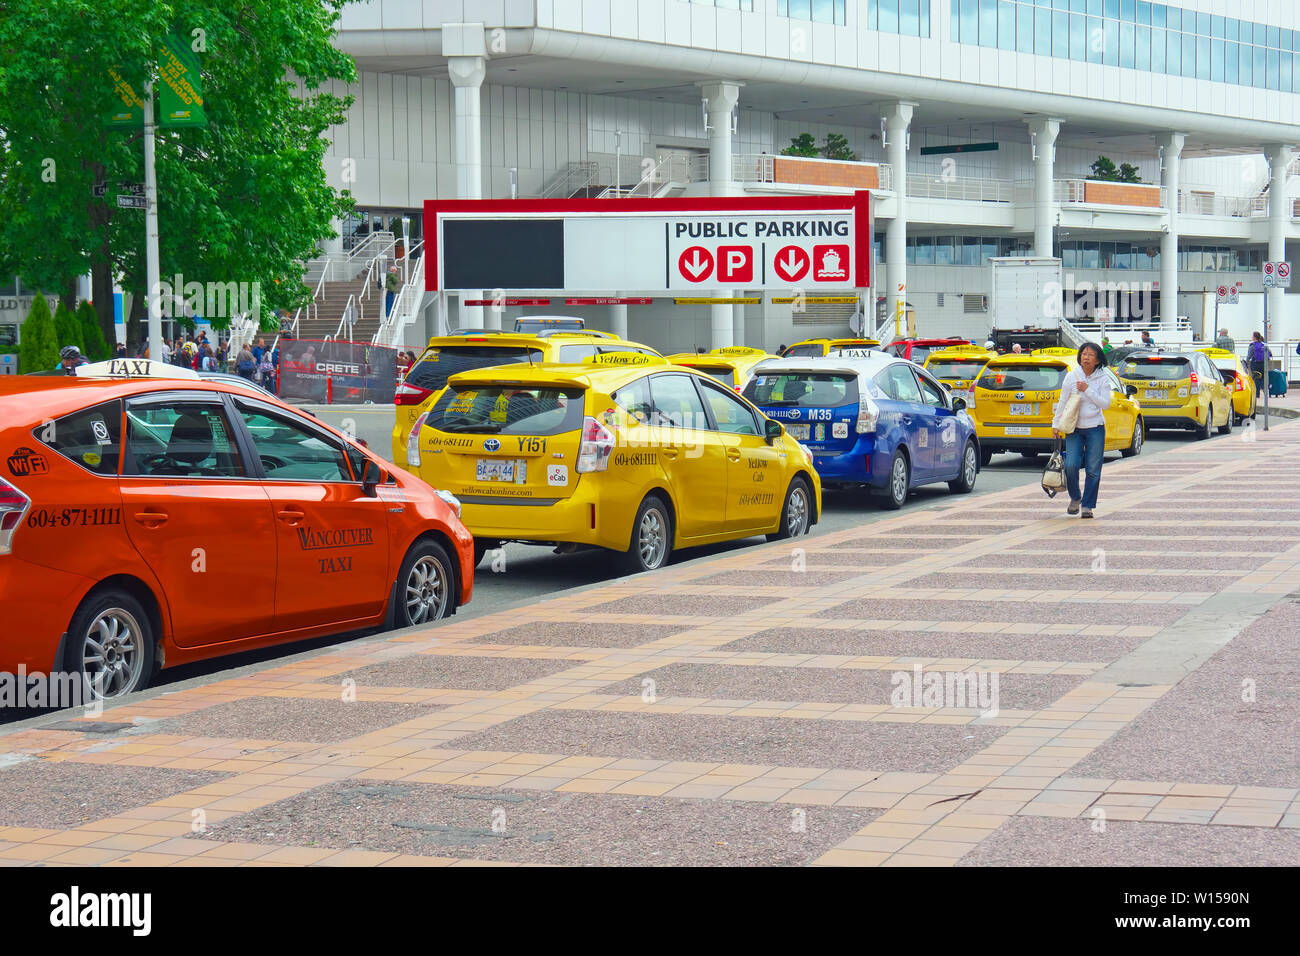 Small electric eCab taxis lined up outside Vancouver Convention Centre.  Vancouver, British Columbia, Canada Stock Photo